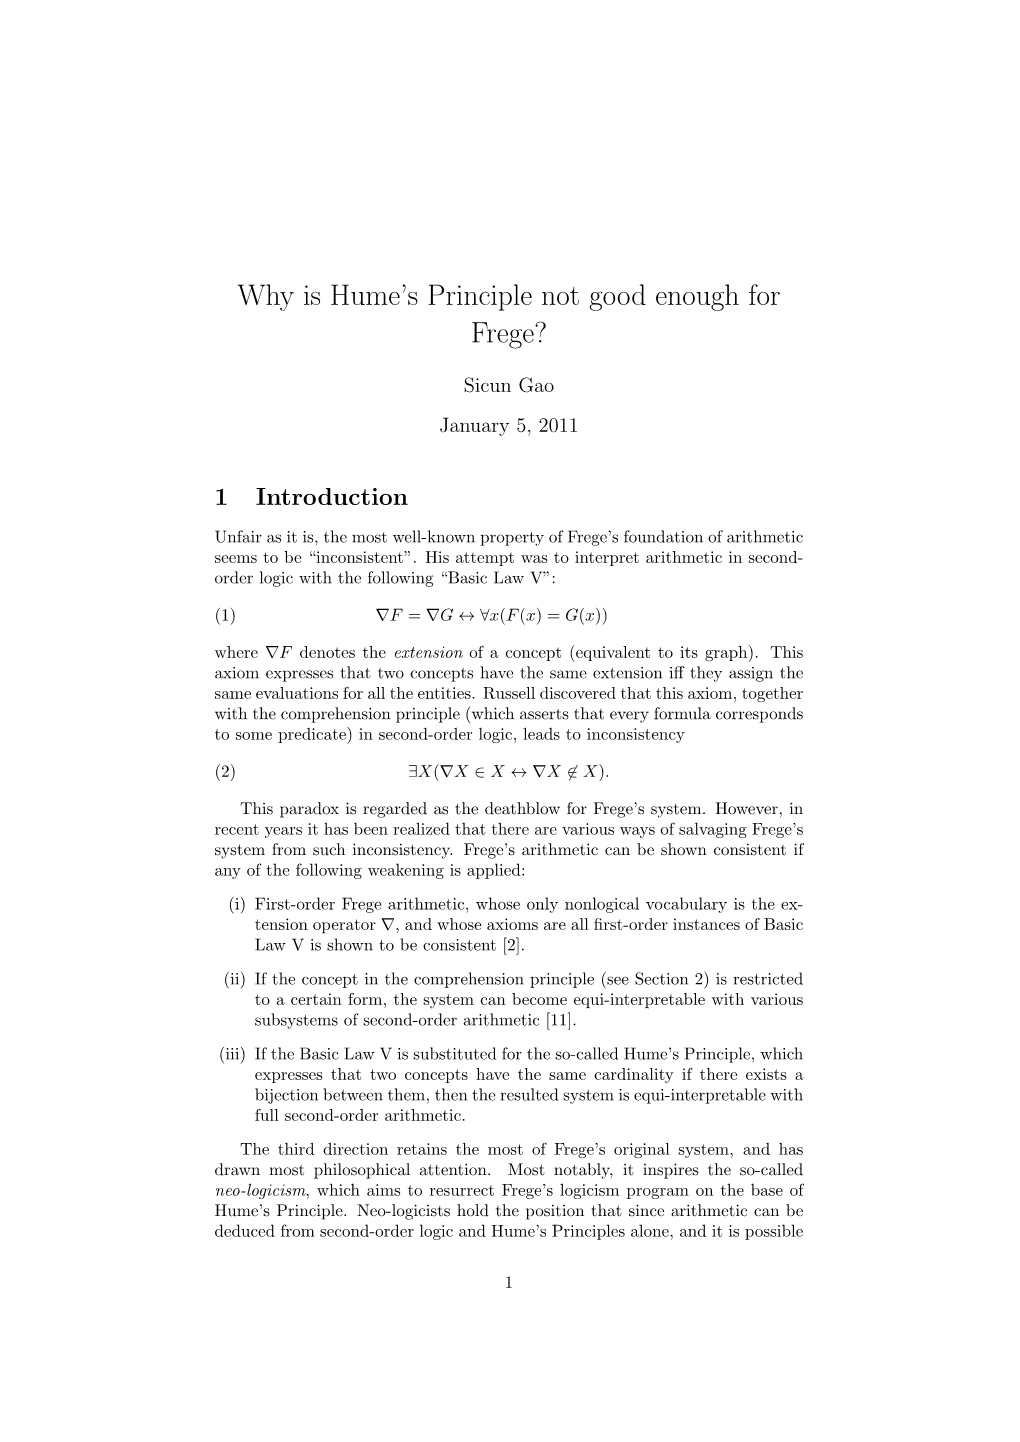 Why Is Hume's Principle Not Good Enough for Frege?